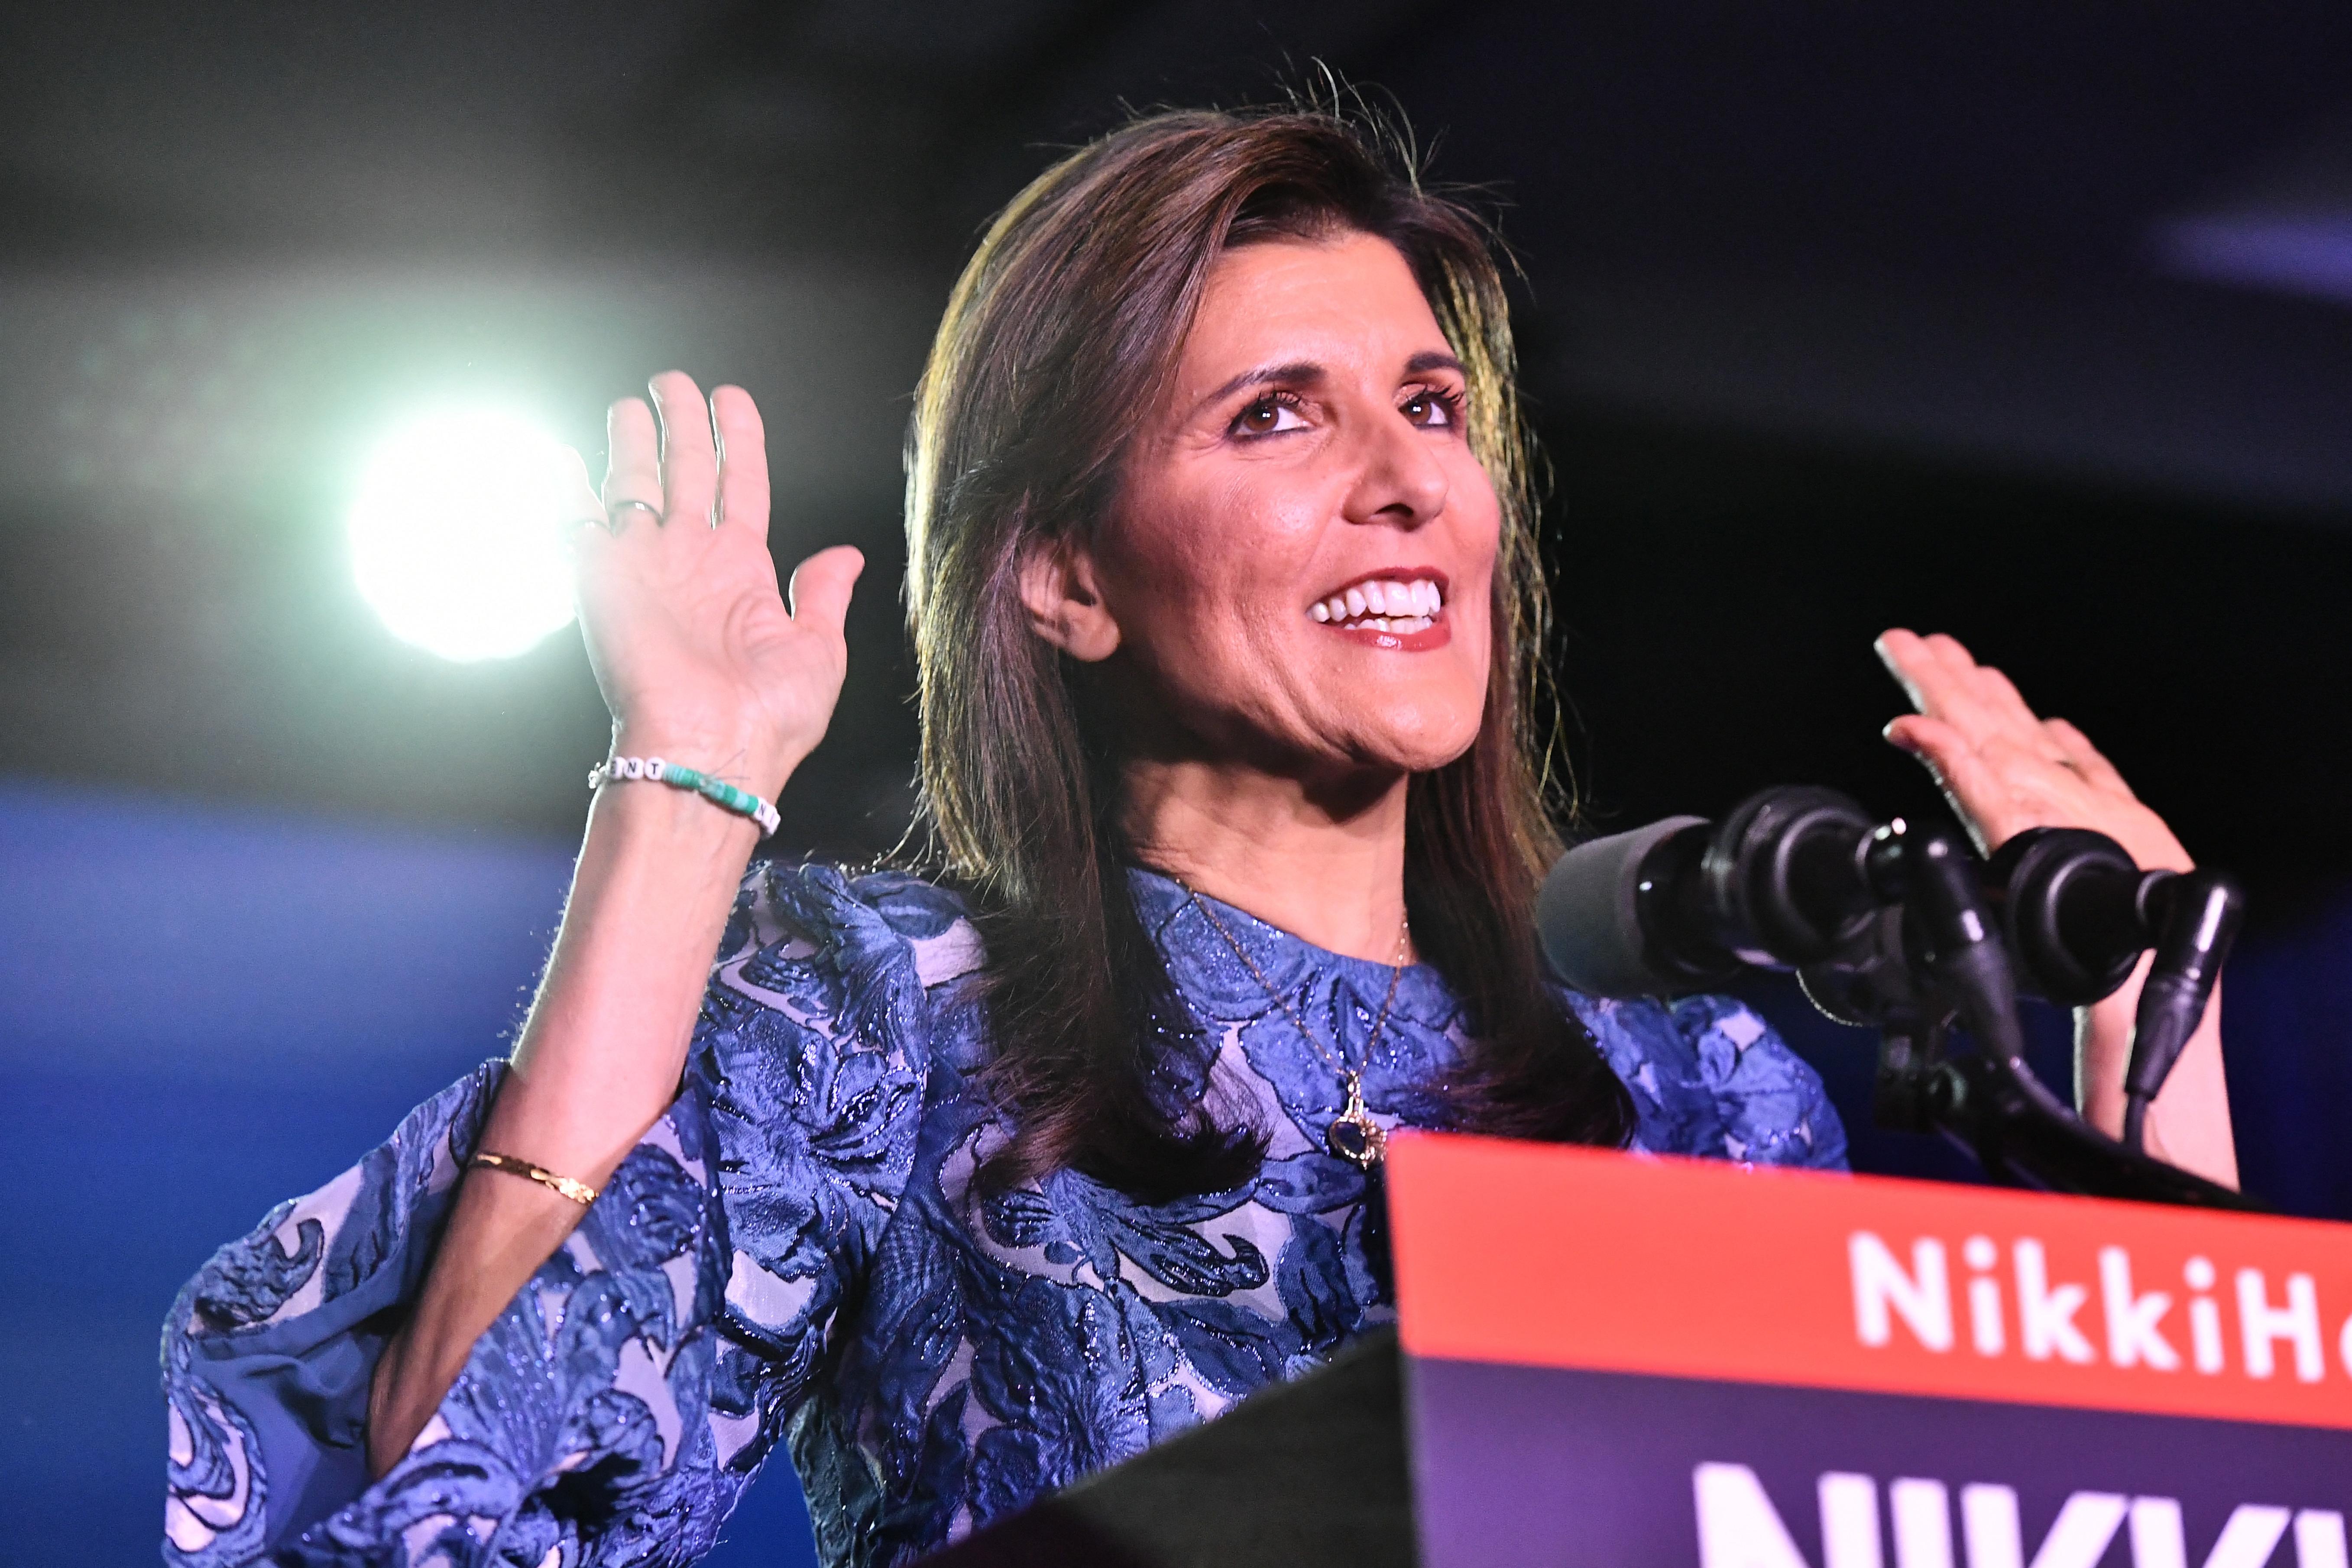 Nikki Haley, onstage at a campaign event, smiles and holds up her hands.